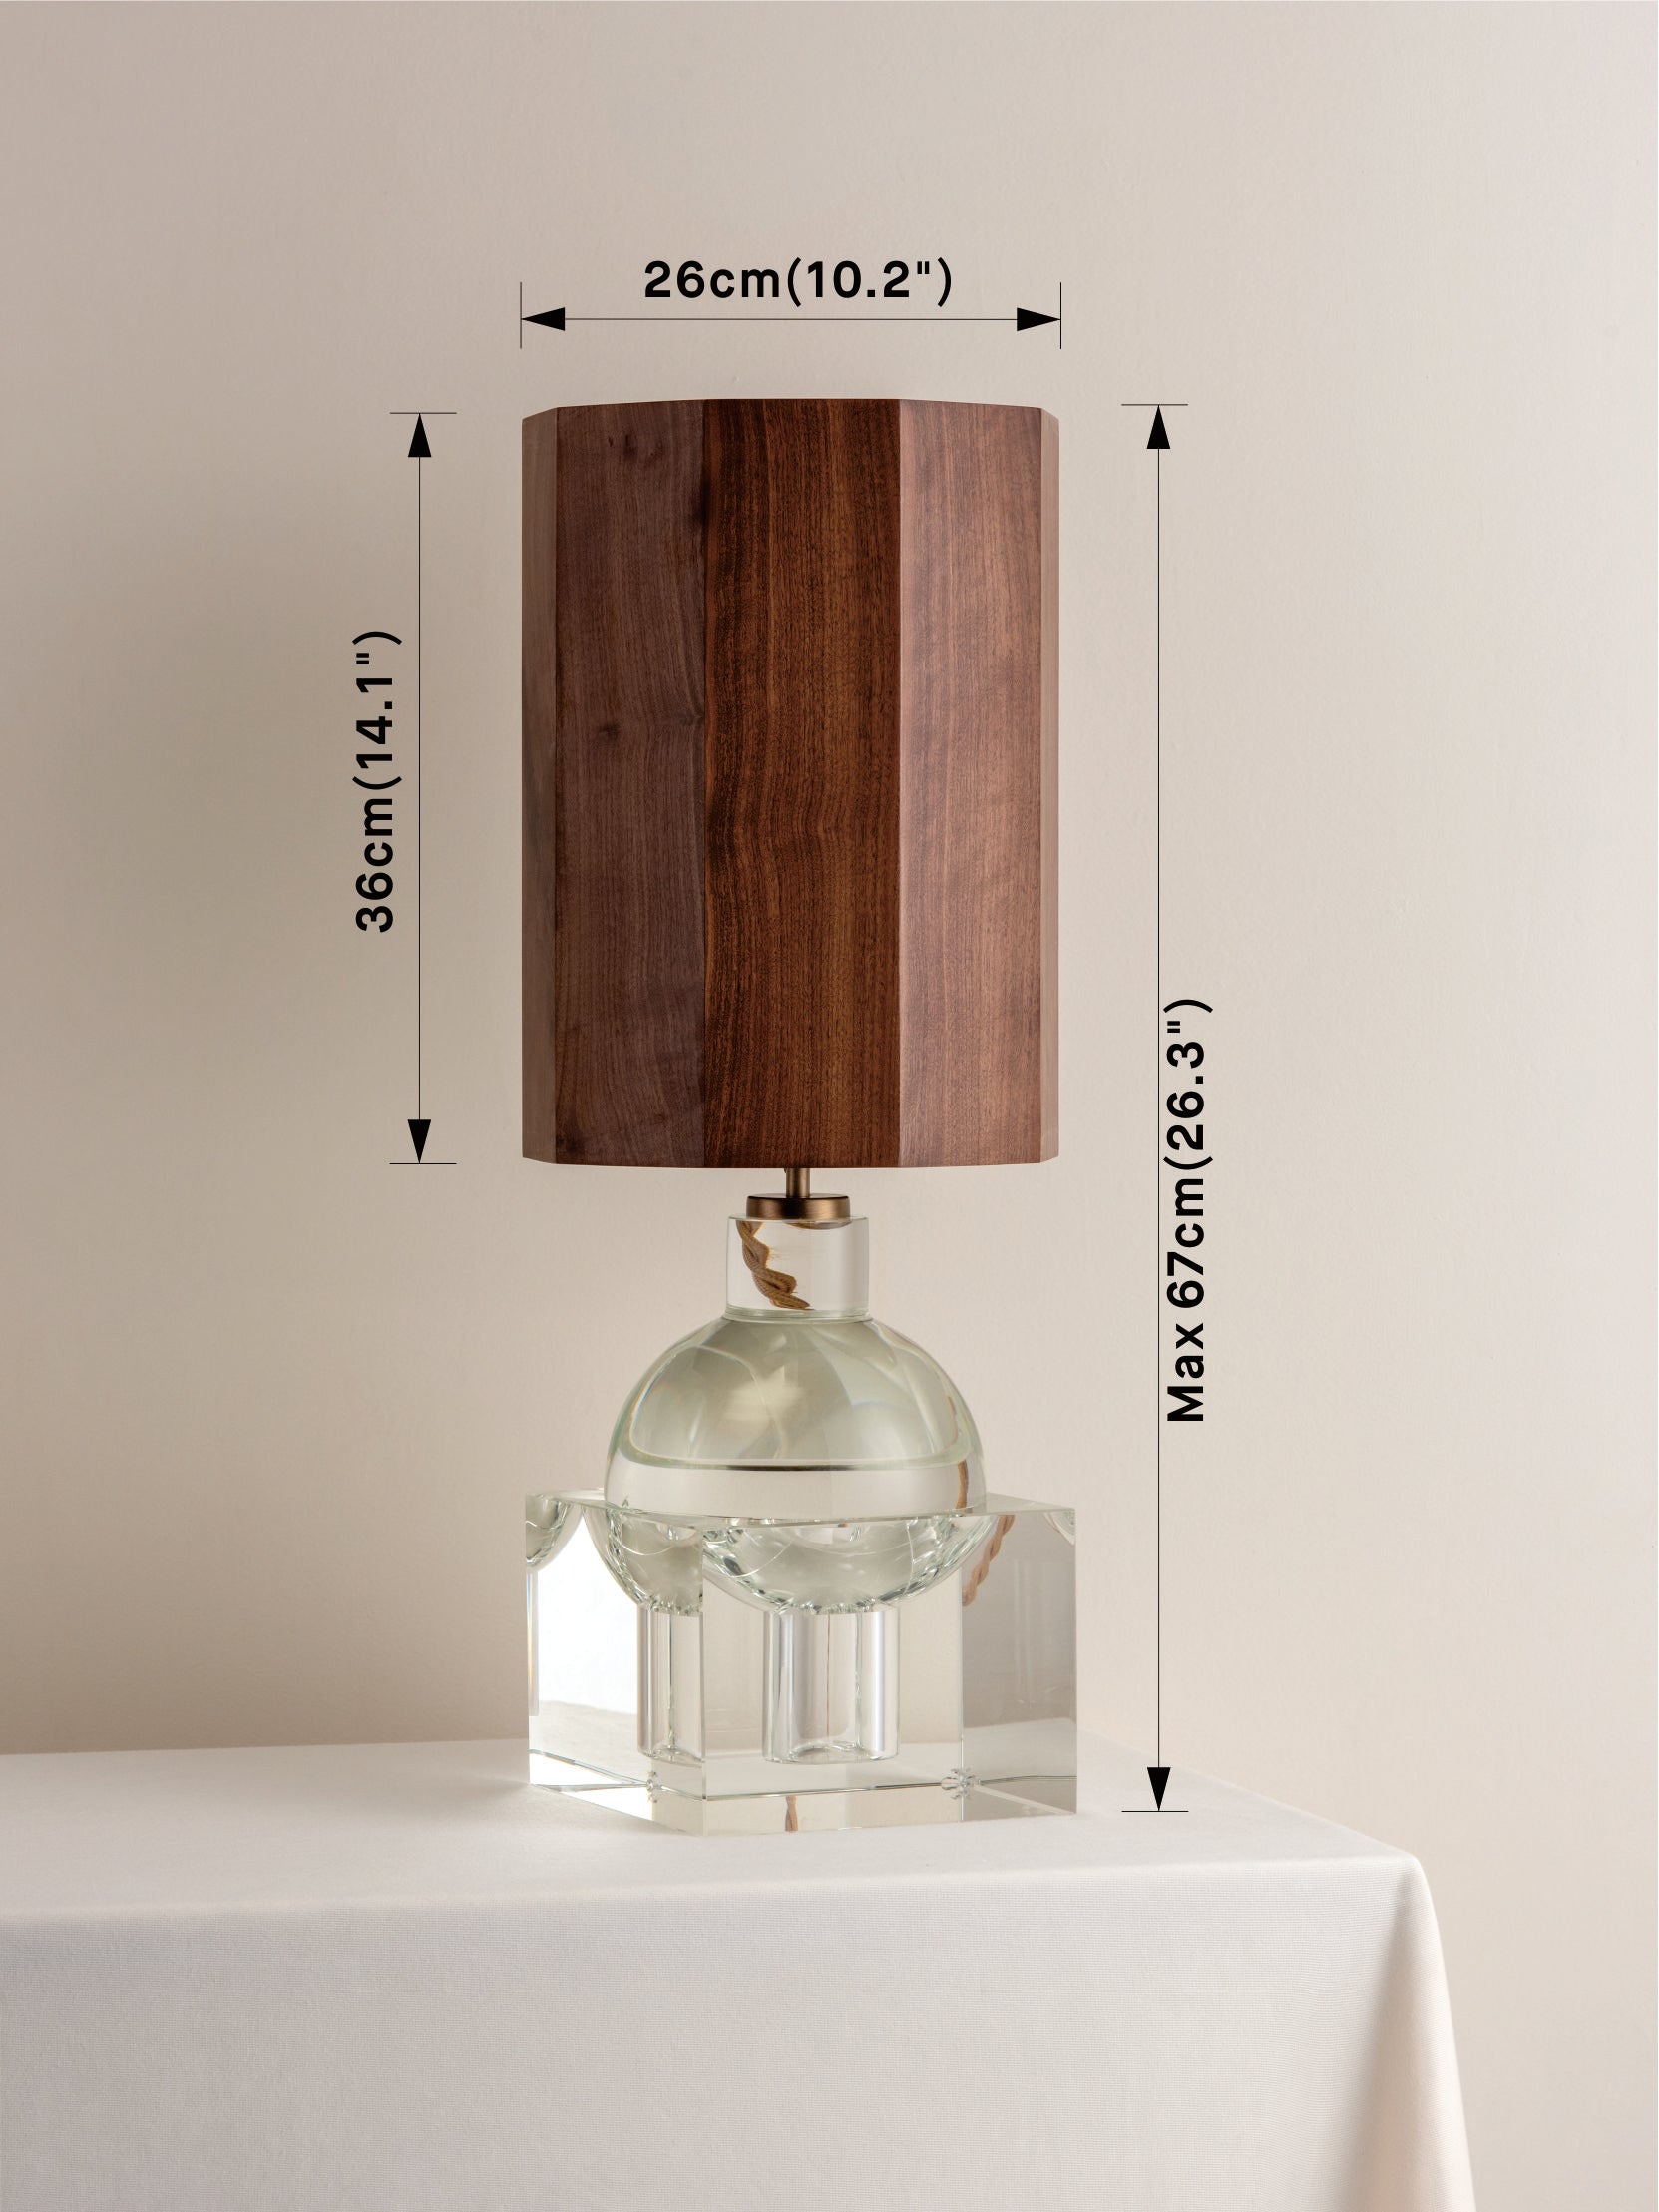 Editions crystal lamp with + walnut wood shade | Table Lamp | Lights & Lamps | UK | Modern Affordable Designer Lighting